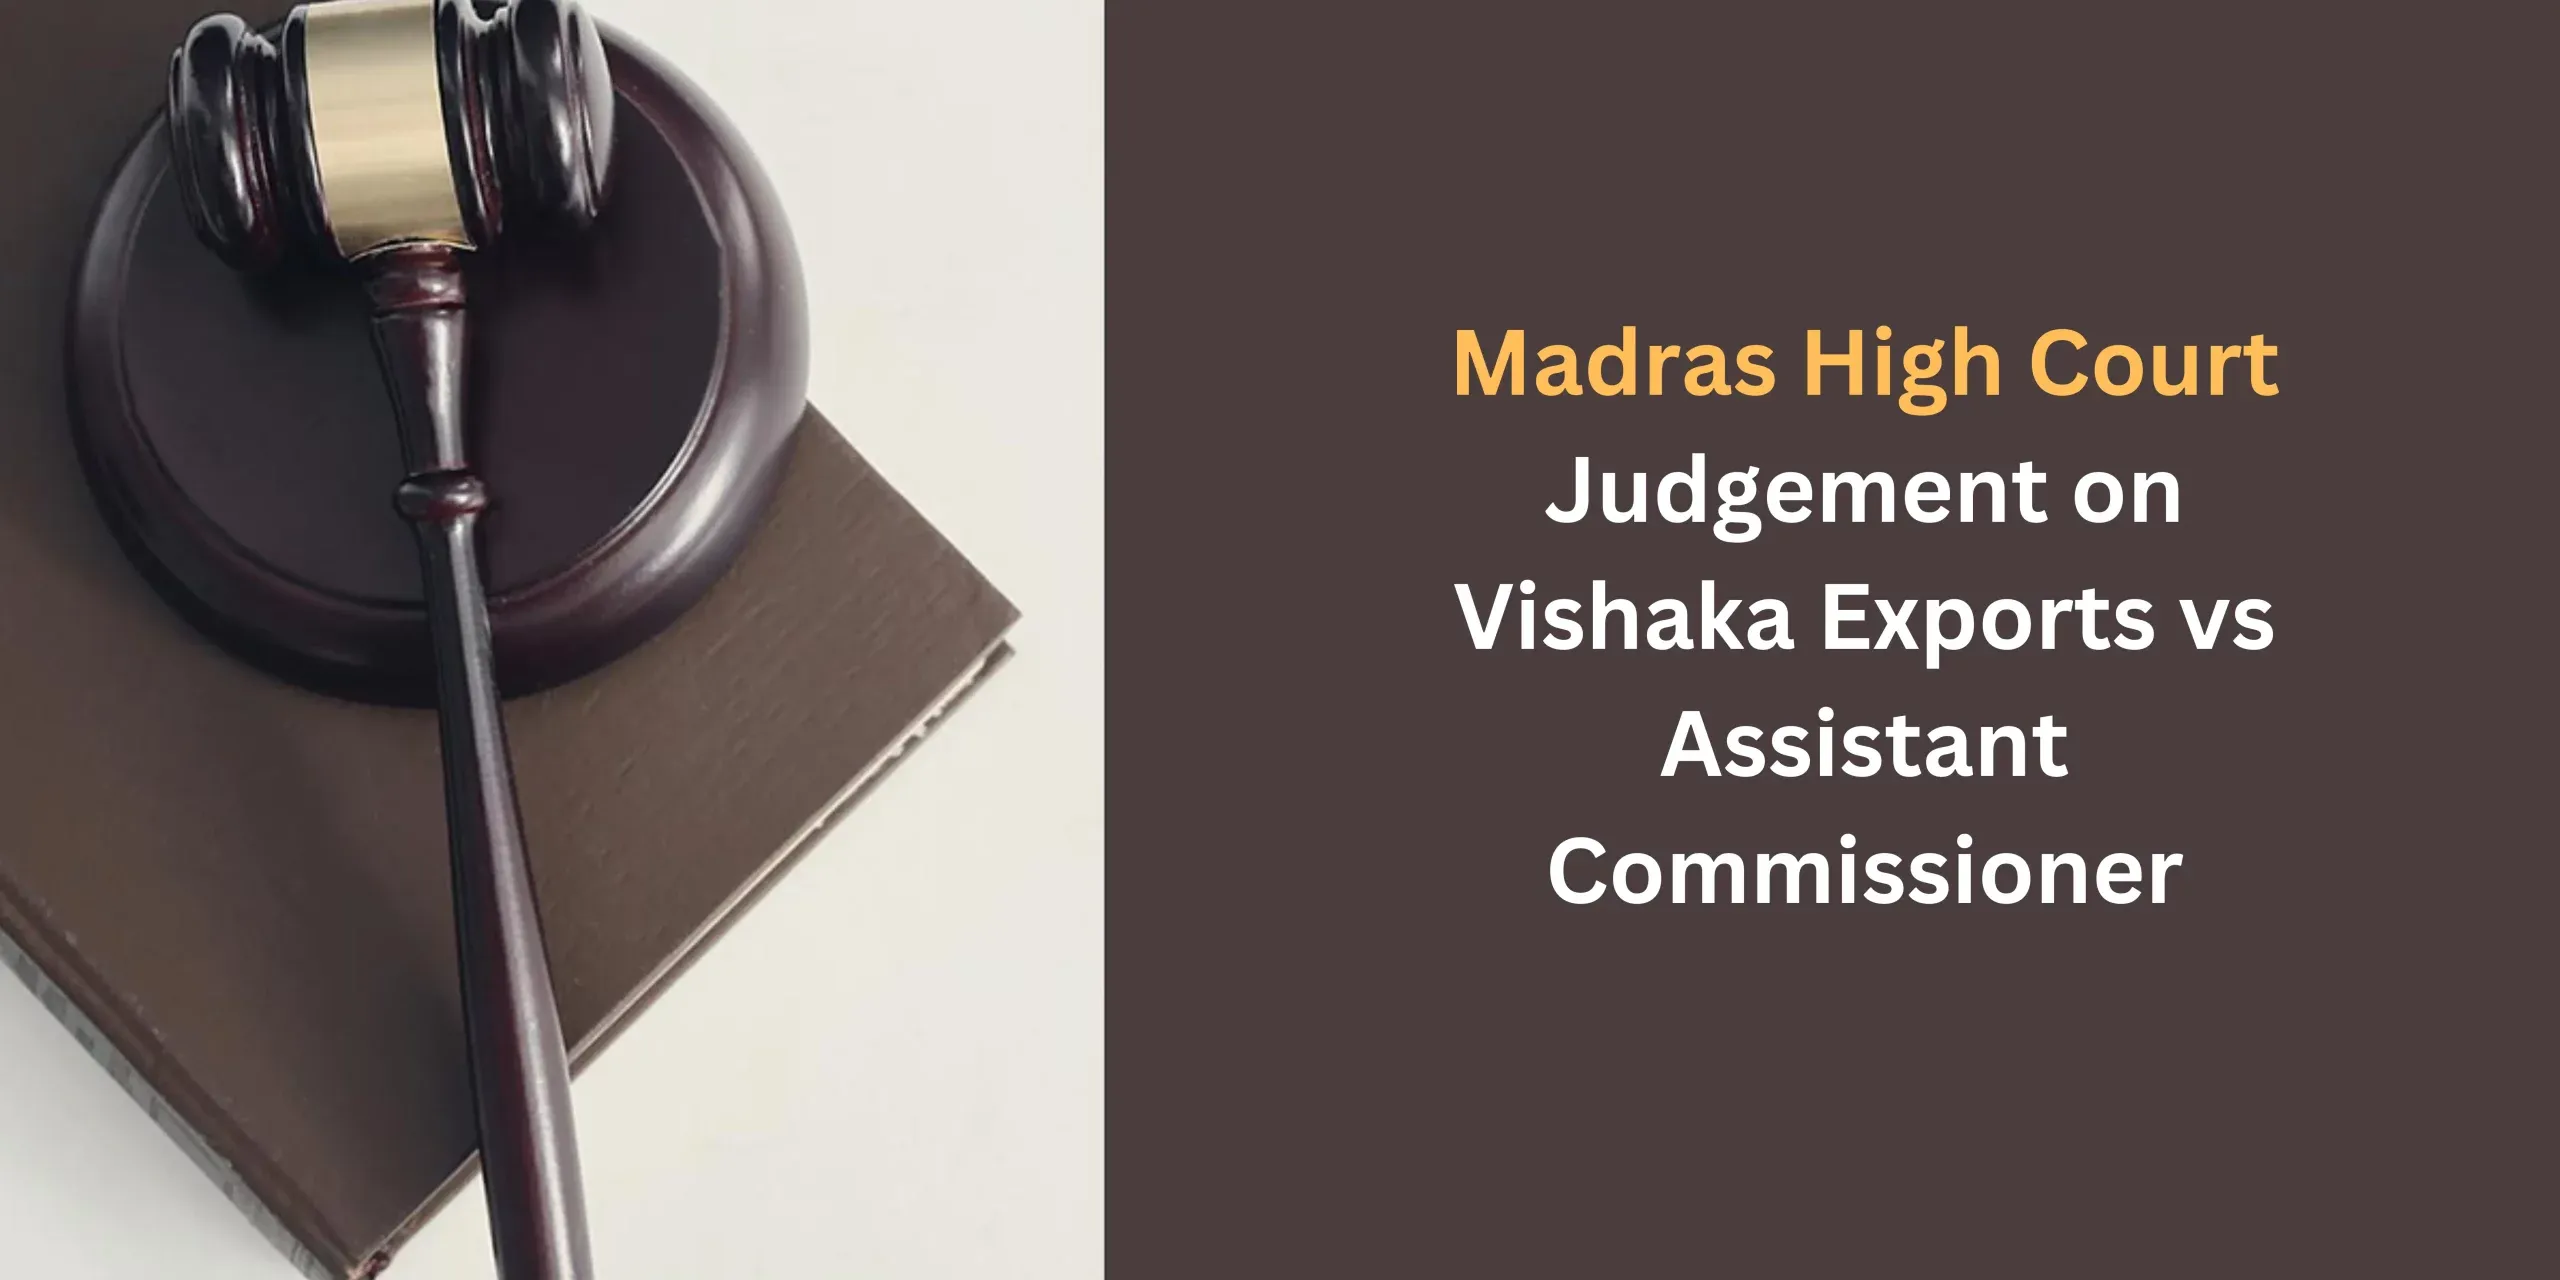 Decoding the judgement of the Madras High court on Vishaka Exports vs Assistant Commissioner.